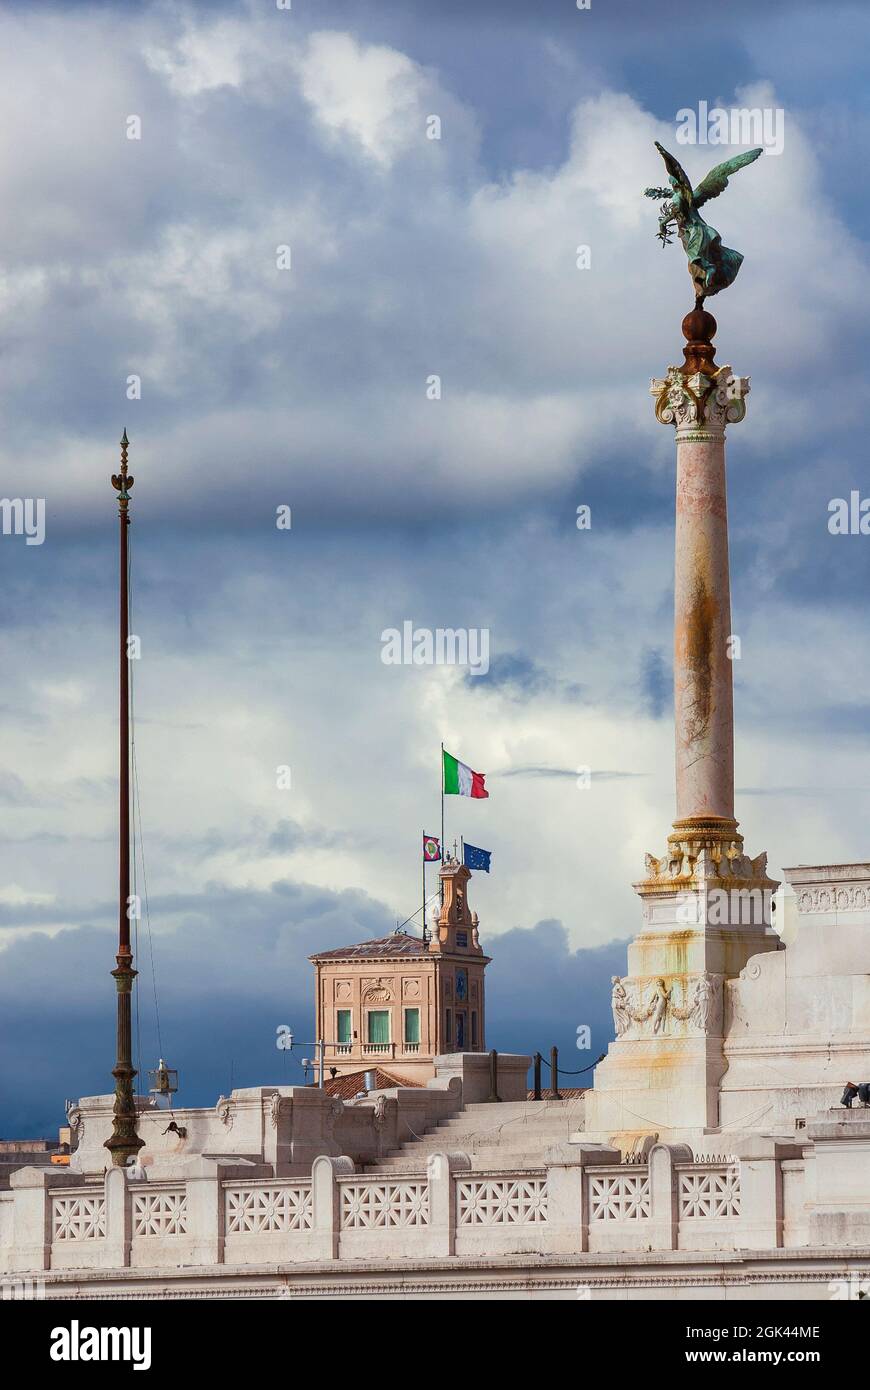 Italian Nation and Republic. View of the Altar of Nation and Quirinal Hill tower with national flag in Rome Stock Photo